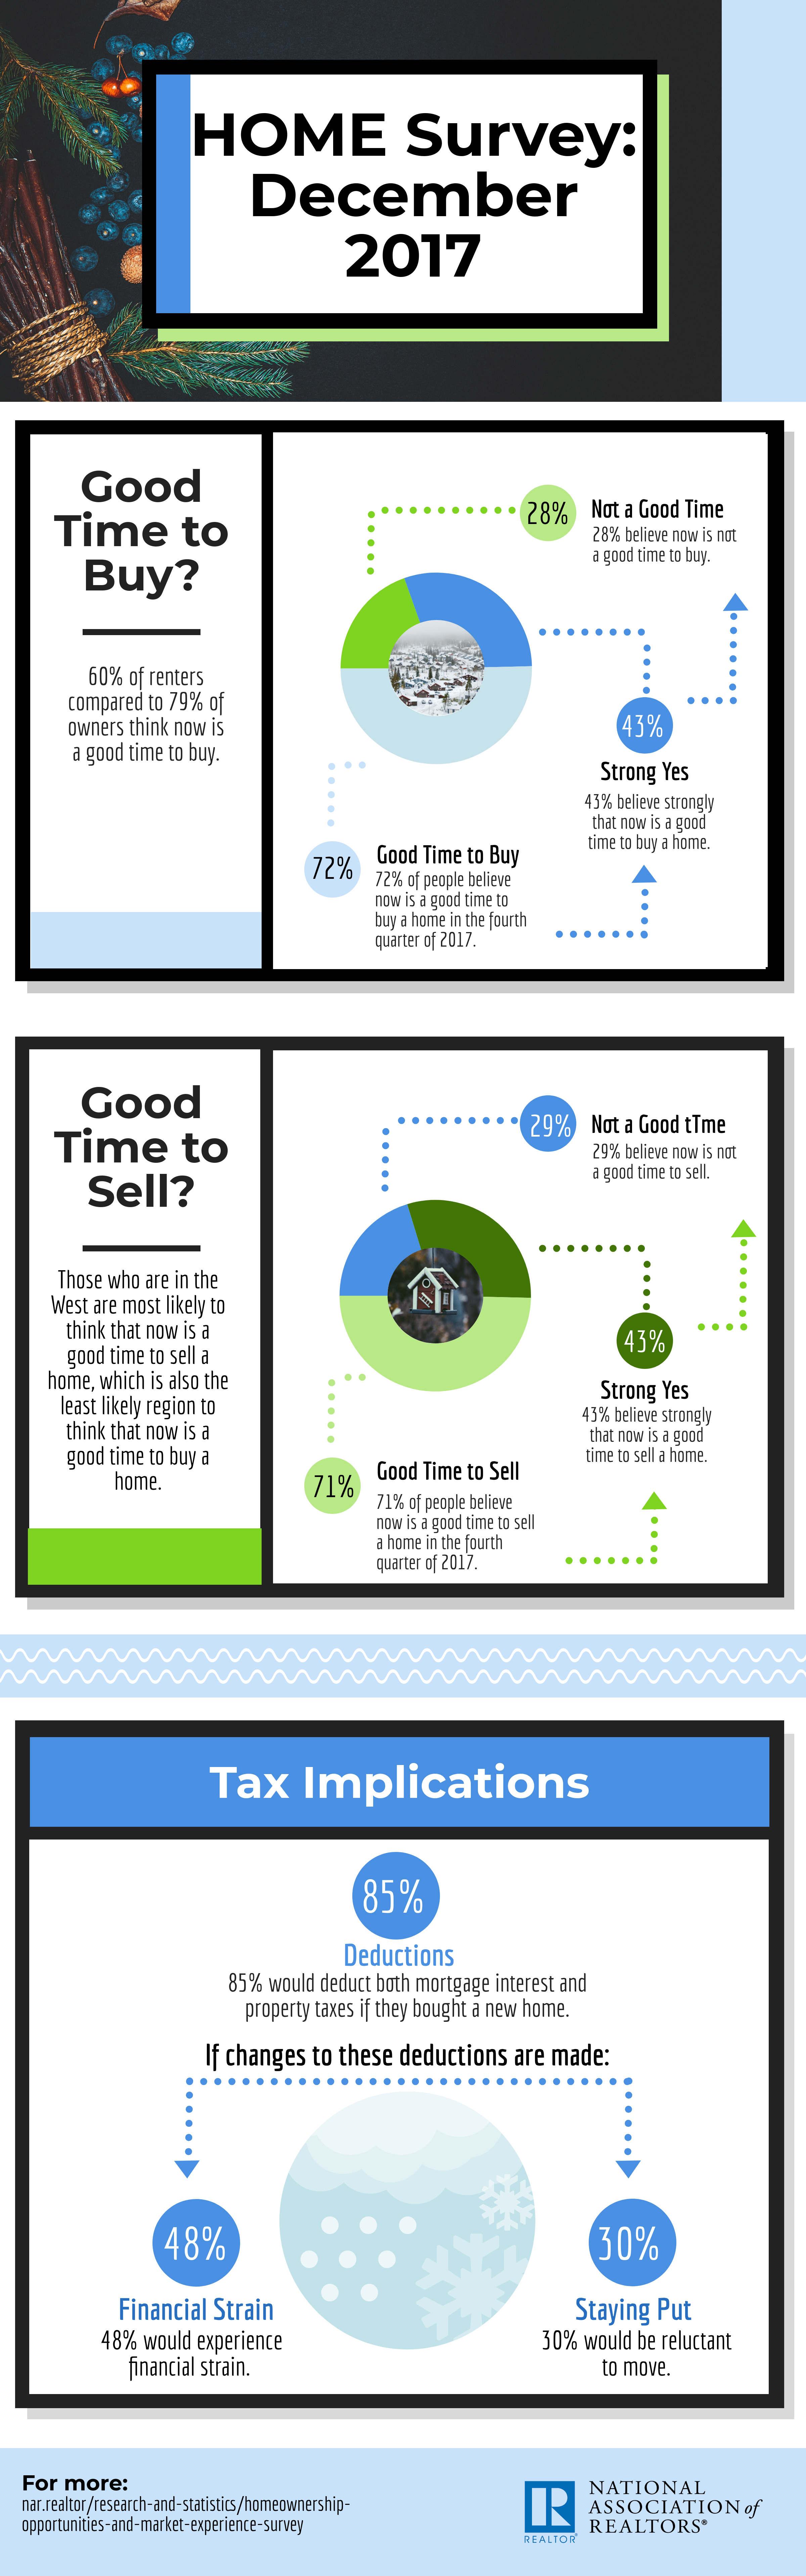 Q4 Home Survey Infographic.png